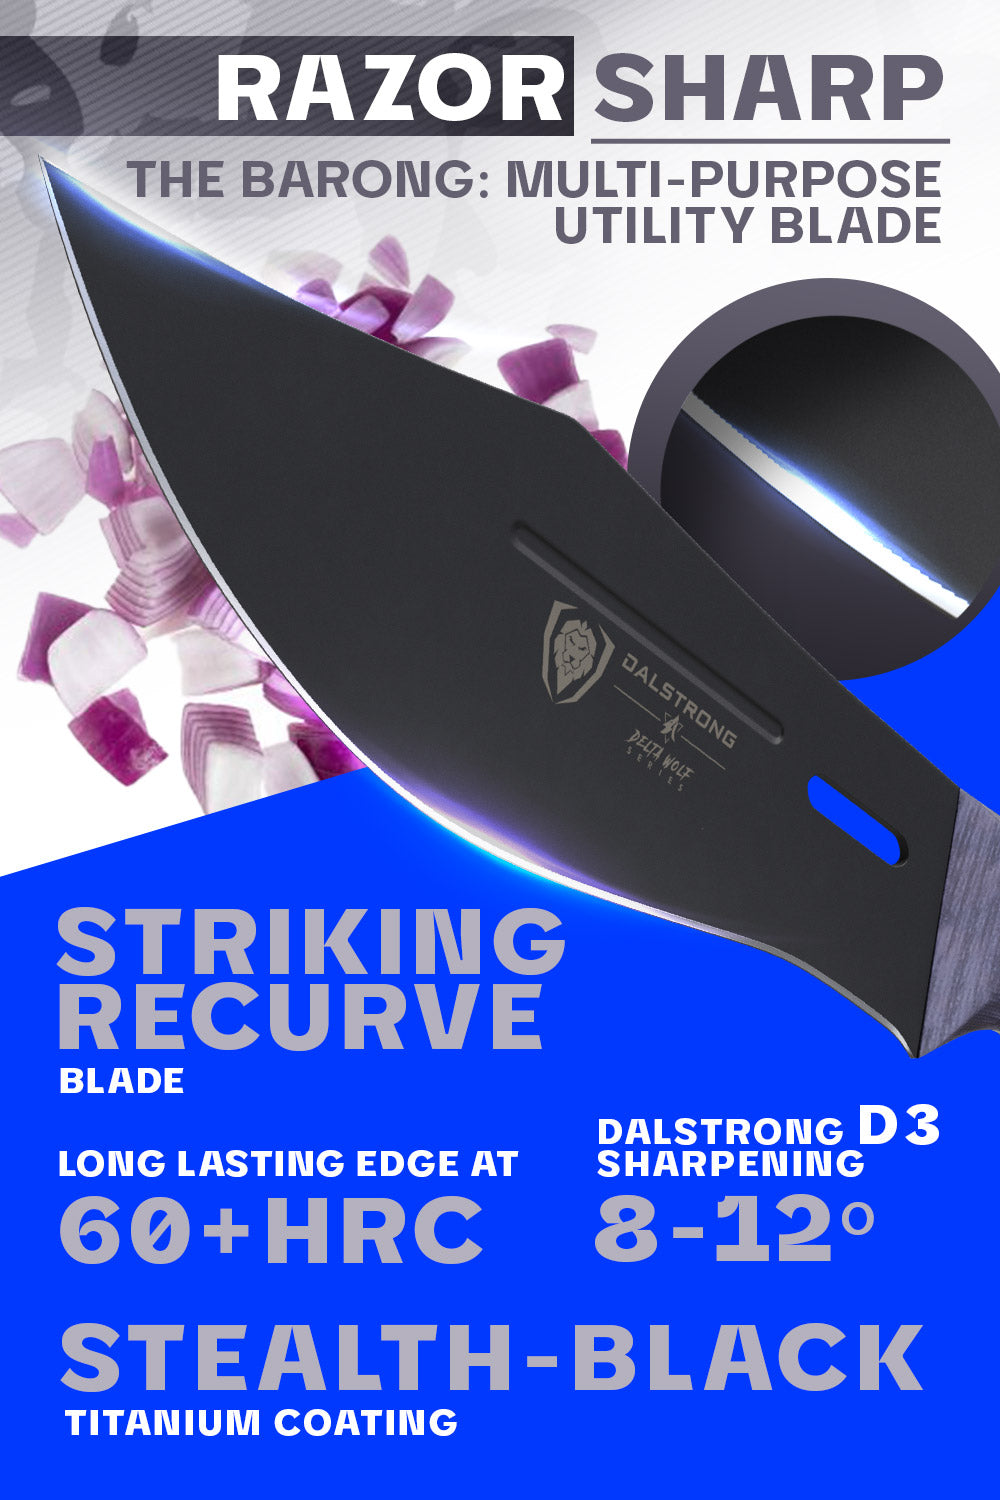 Dalstrong delta wolf series 7 inch barong chef knife featuring it's razor sharp black blade.